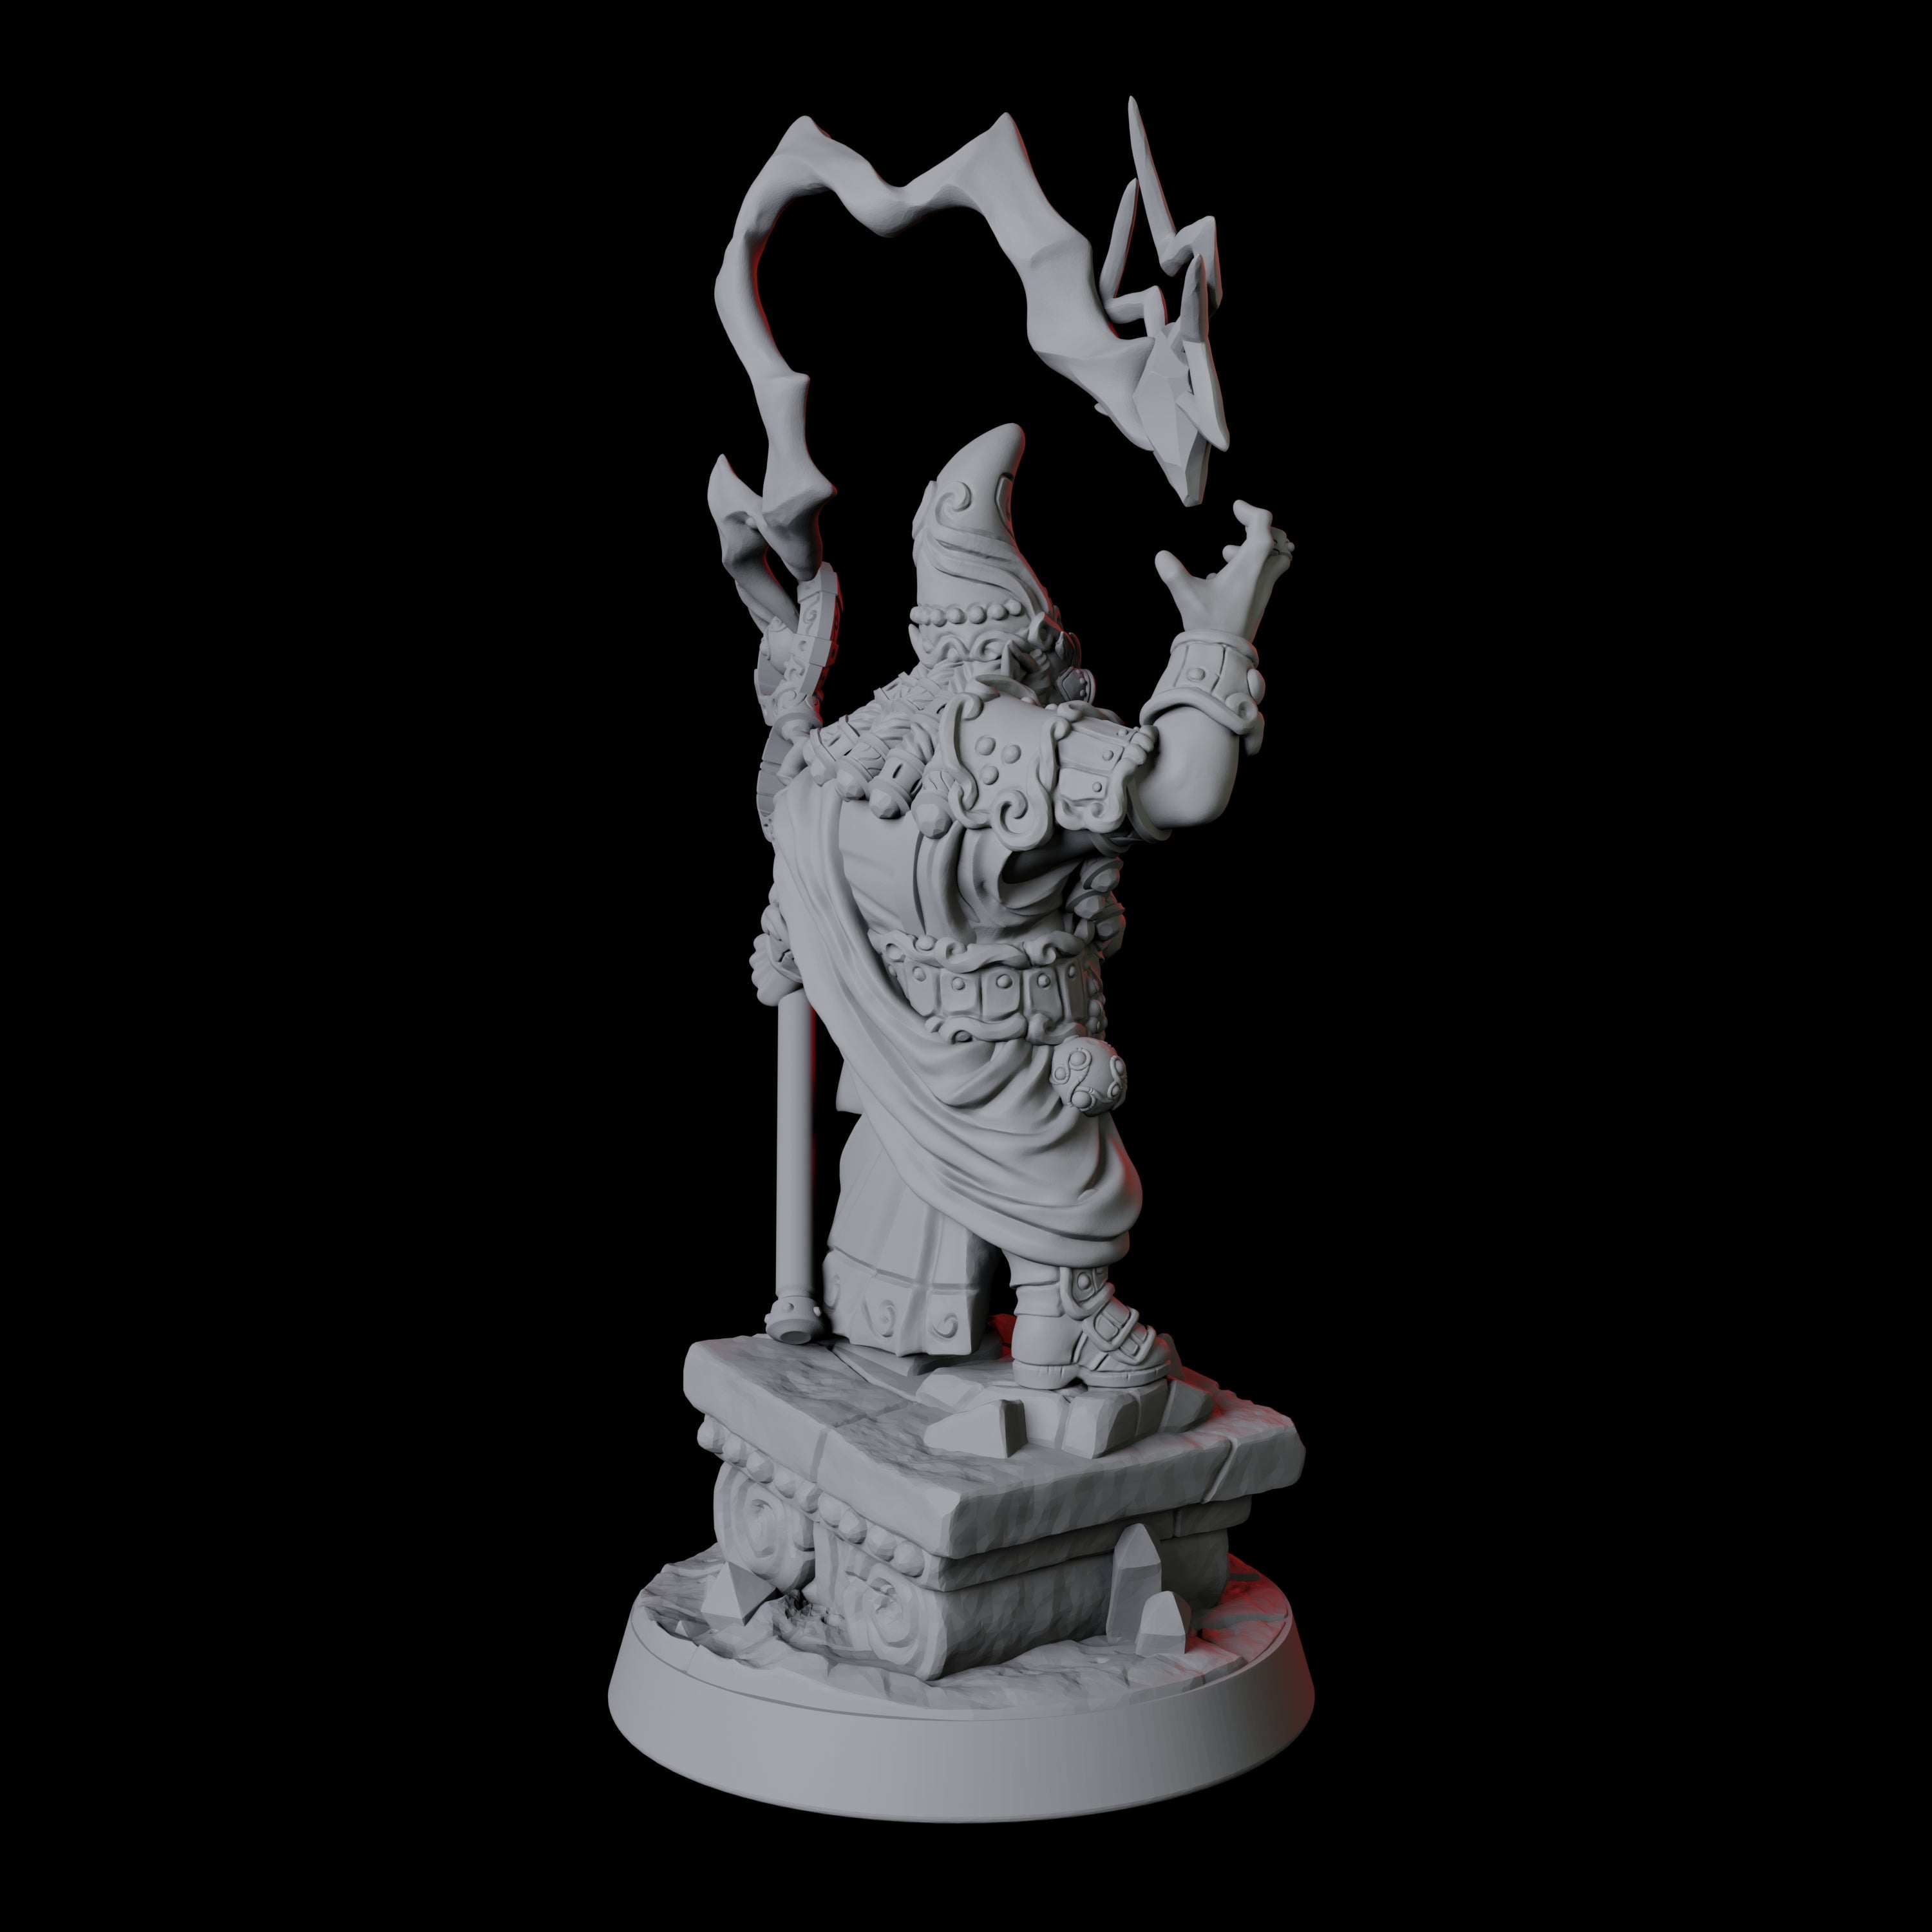 Gnome King Miniature for Dungeons and Dragons, Pathfinder or other TTRPGs